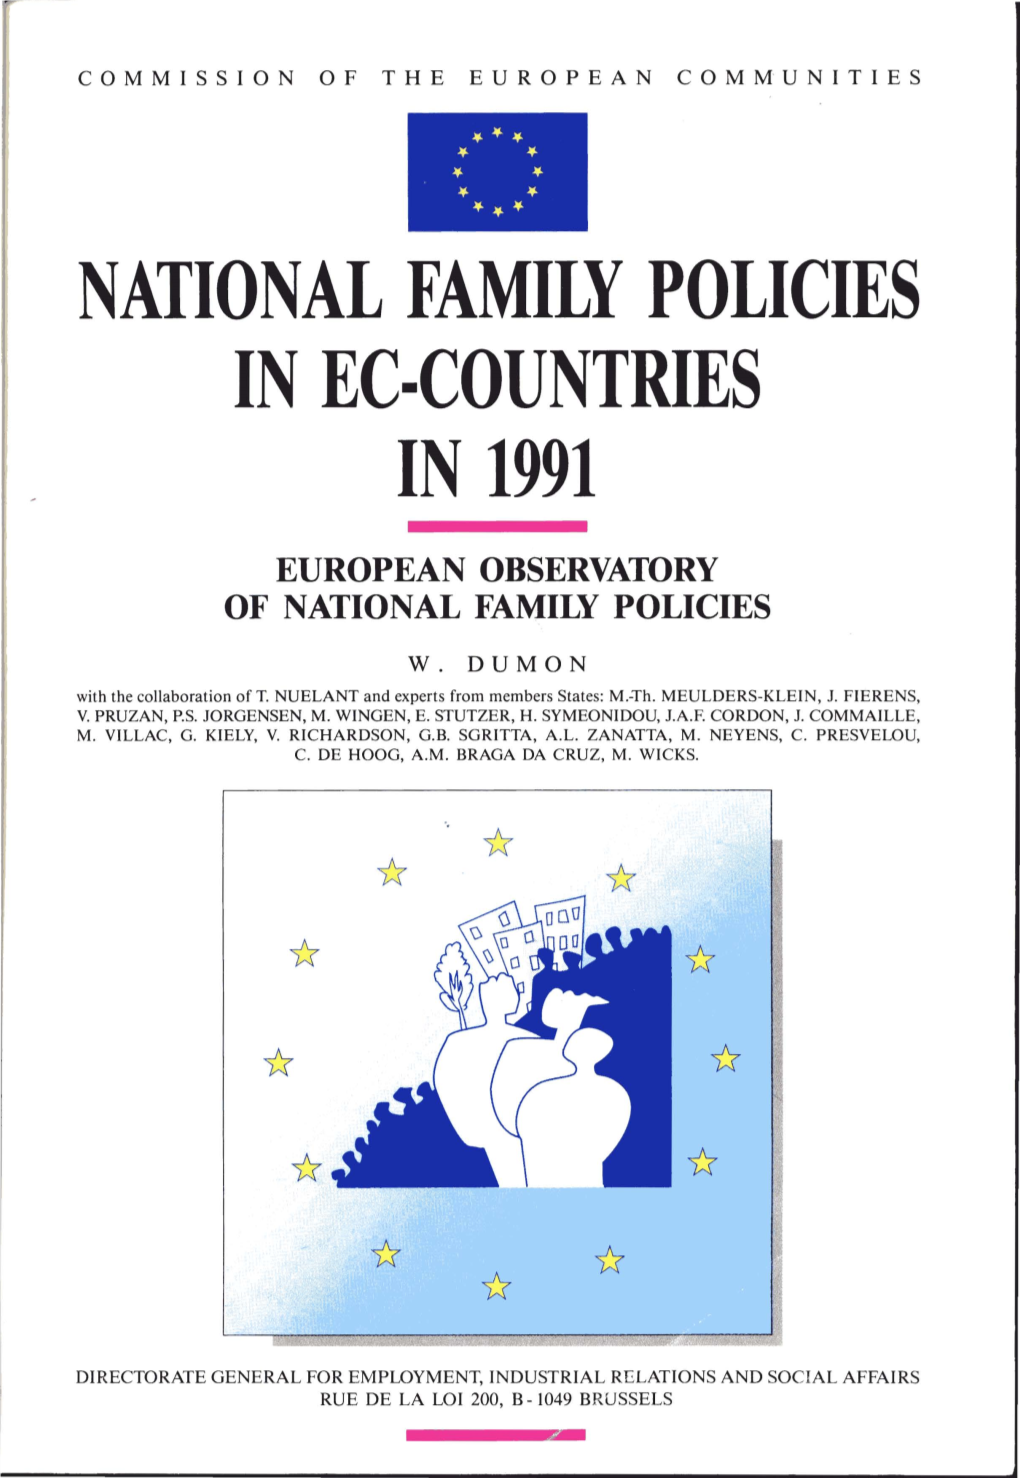 National Family Policies in Ec-Countries in 1991